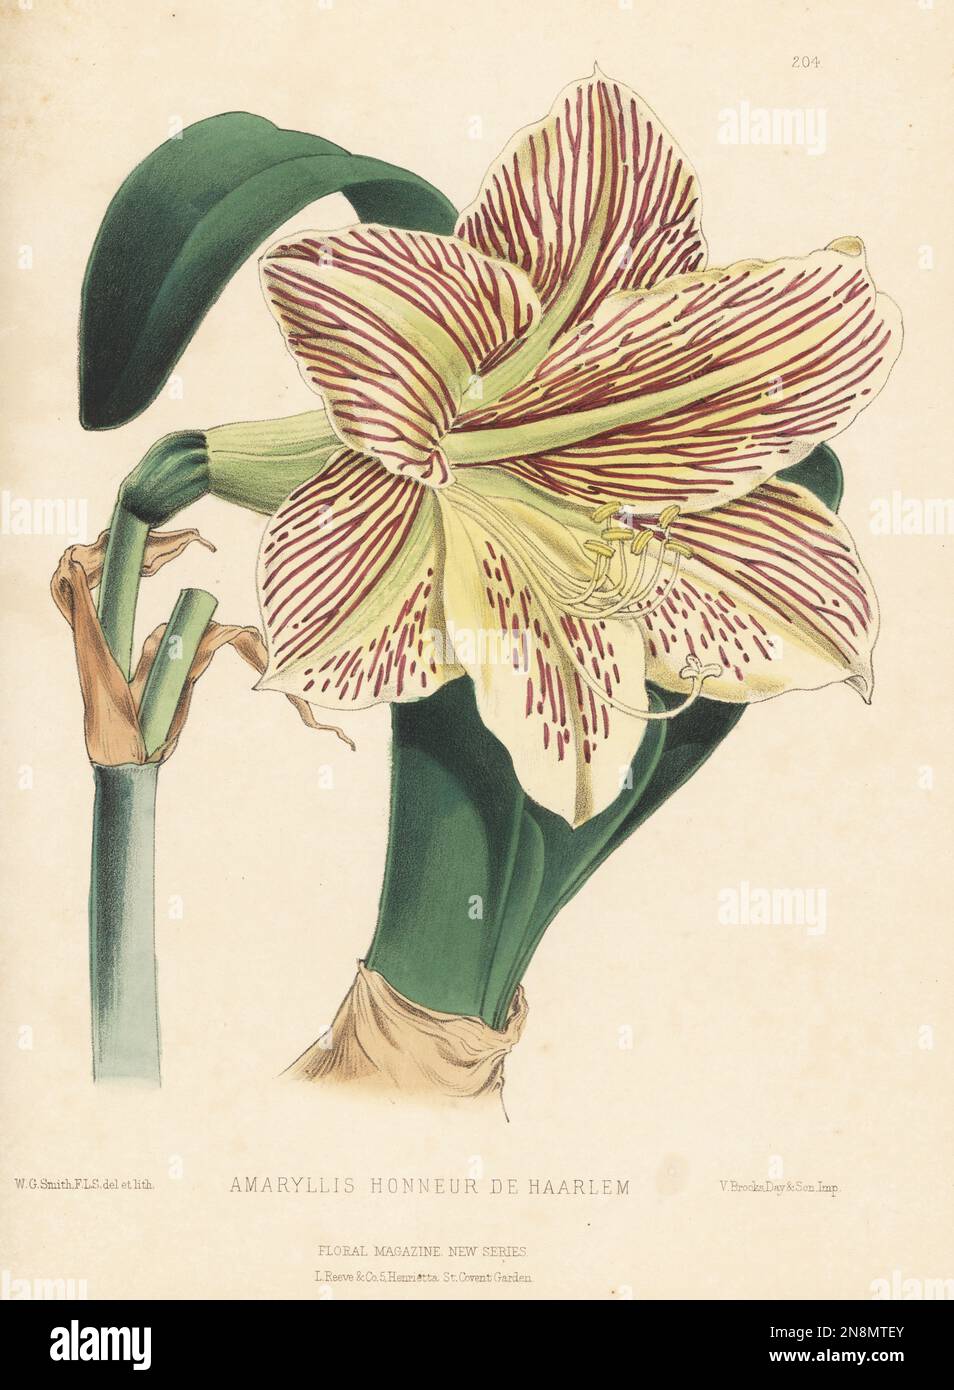 Amaryllis Honneur de Haarlem, Hippeastrum hybrid variety. Cross of Hippeastrum pardinum, H. leopoldii and H. ackermanni. Raised by Messrs. Schetzer of Haarlem and sold by James Veitch and Sons, Chelsea. Handcolored botanical illustration drawn and lithographed by Worthington George Smith from Henry Honywood Dombrain's Floral Magazine, New Series, Volume 5, L. Reeve, London, 1876. Lithograph printed by Vincent Brooks, Day & Son. Stock Photo